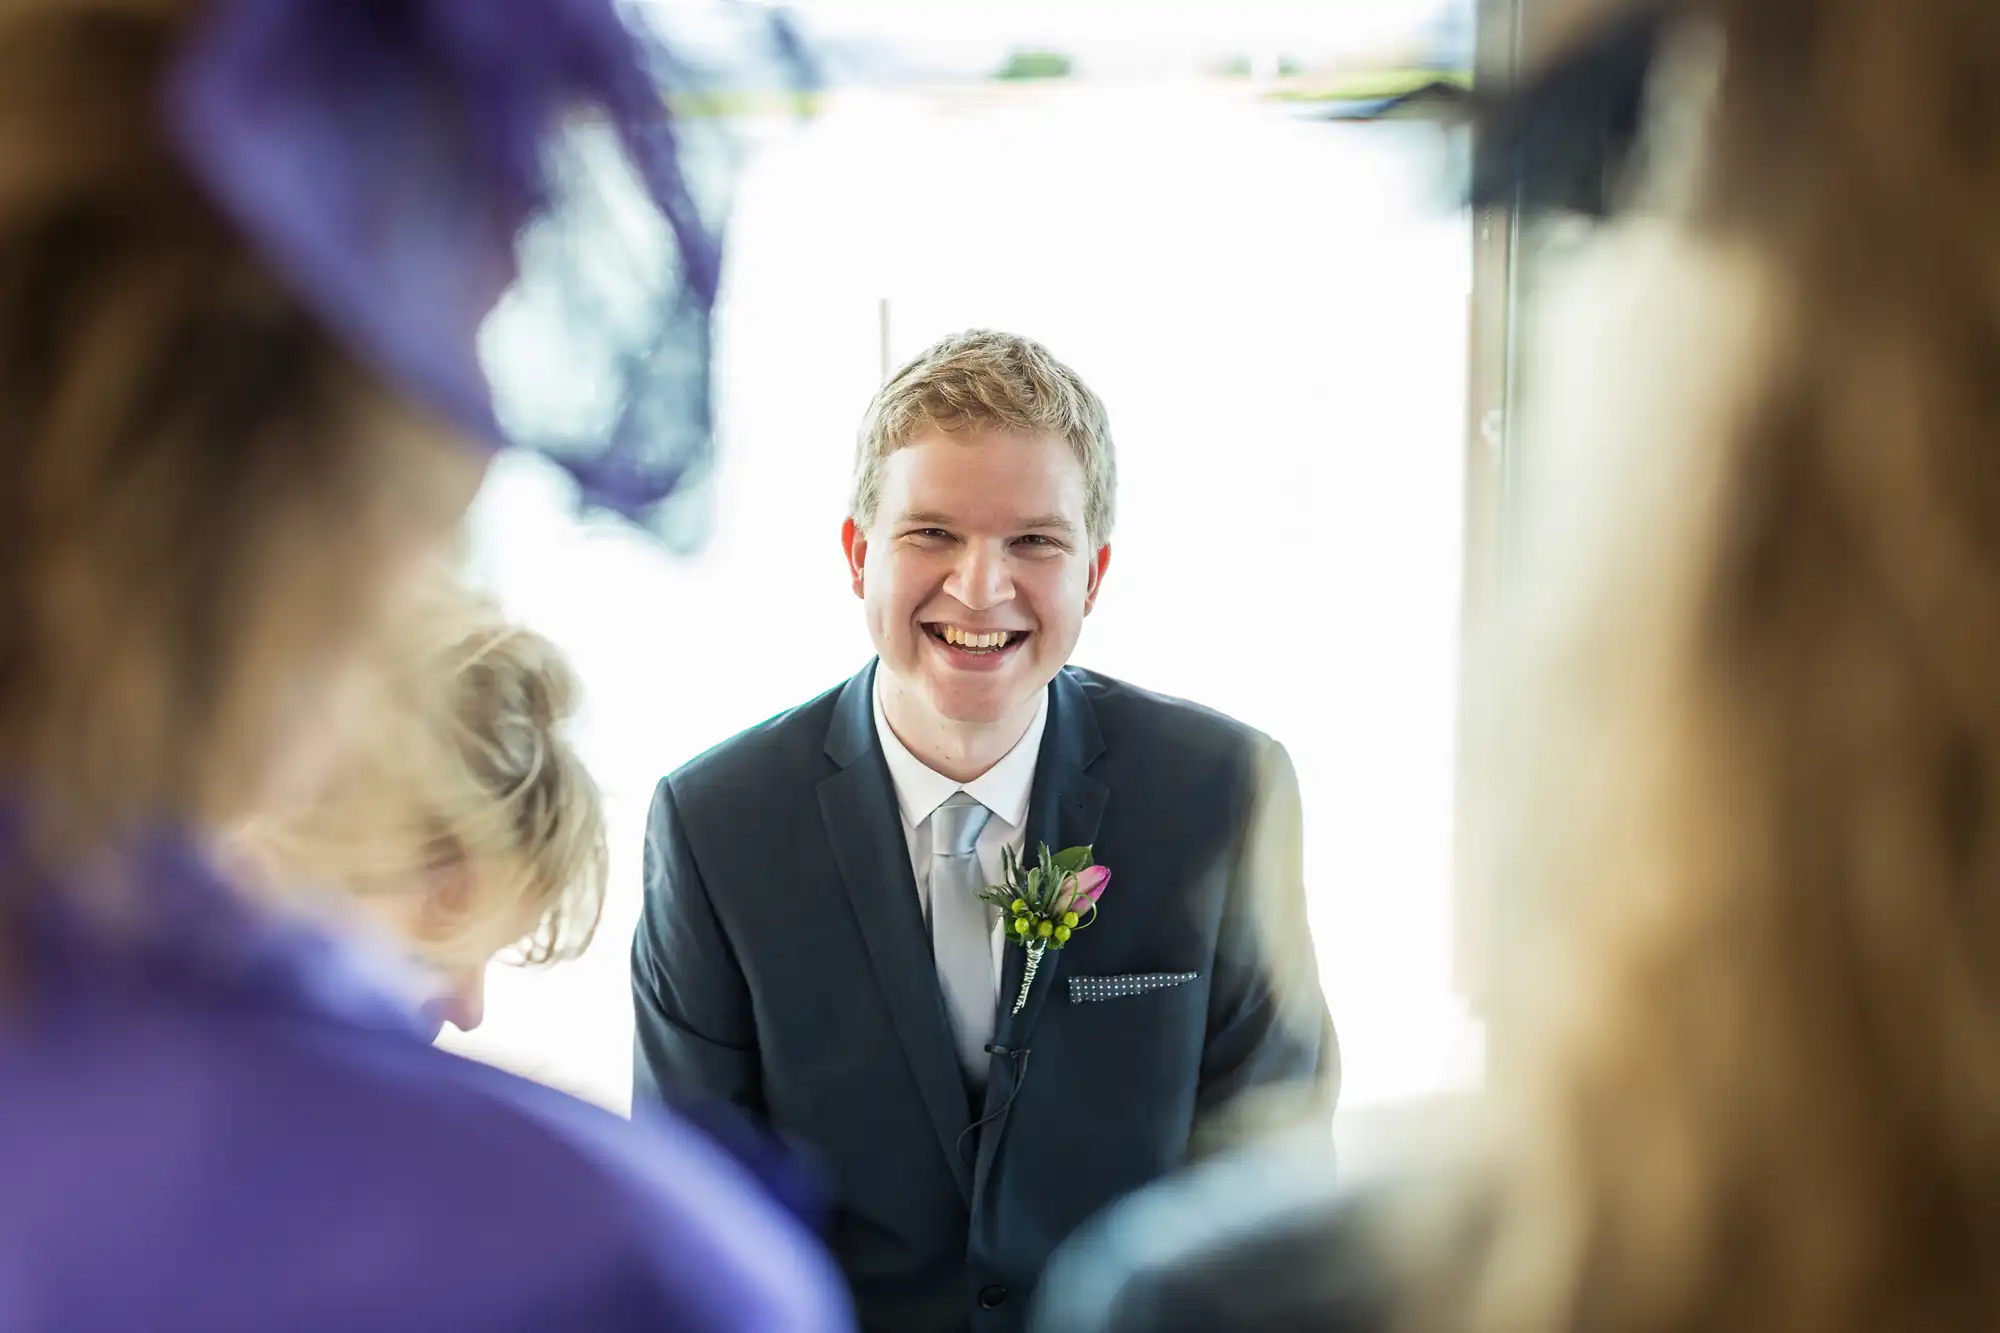 Groom smiling joyously, framed between guests at a wedding ceremony.